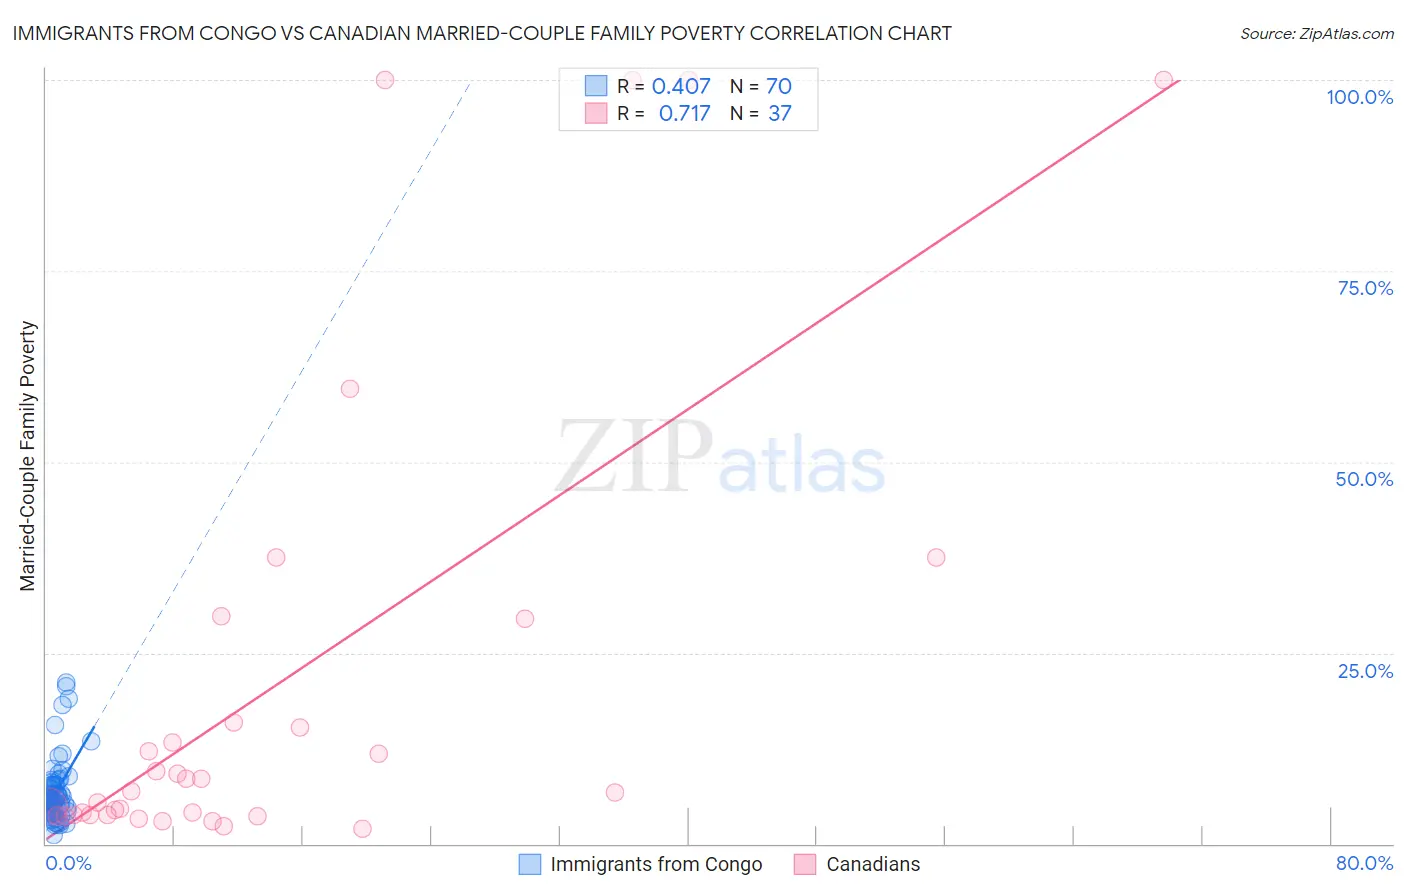 Immigrants from Congo vs Canadian Married-Couple Family Poverty